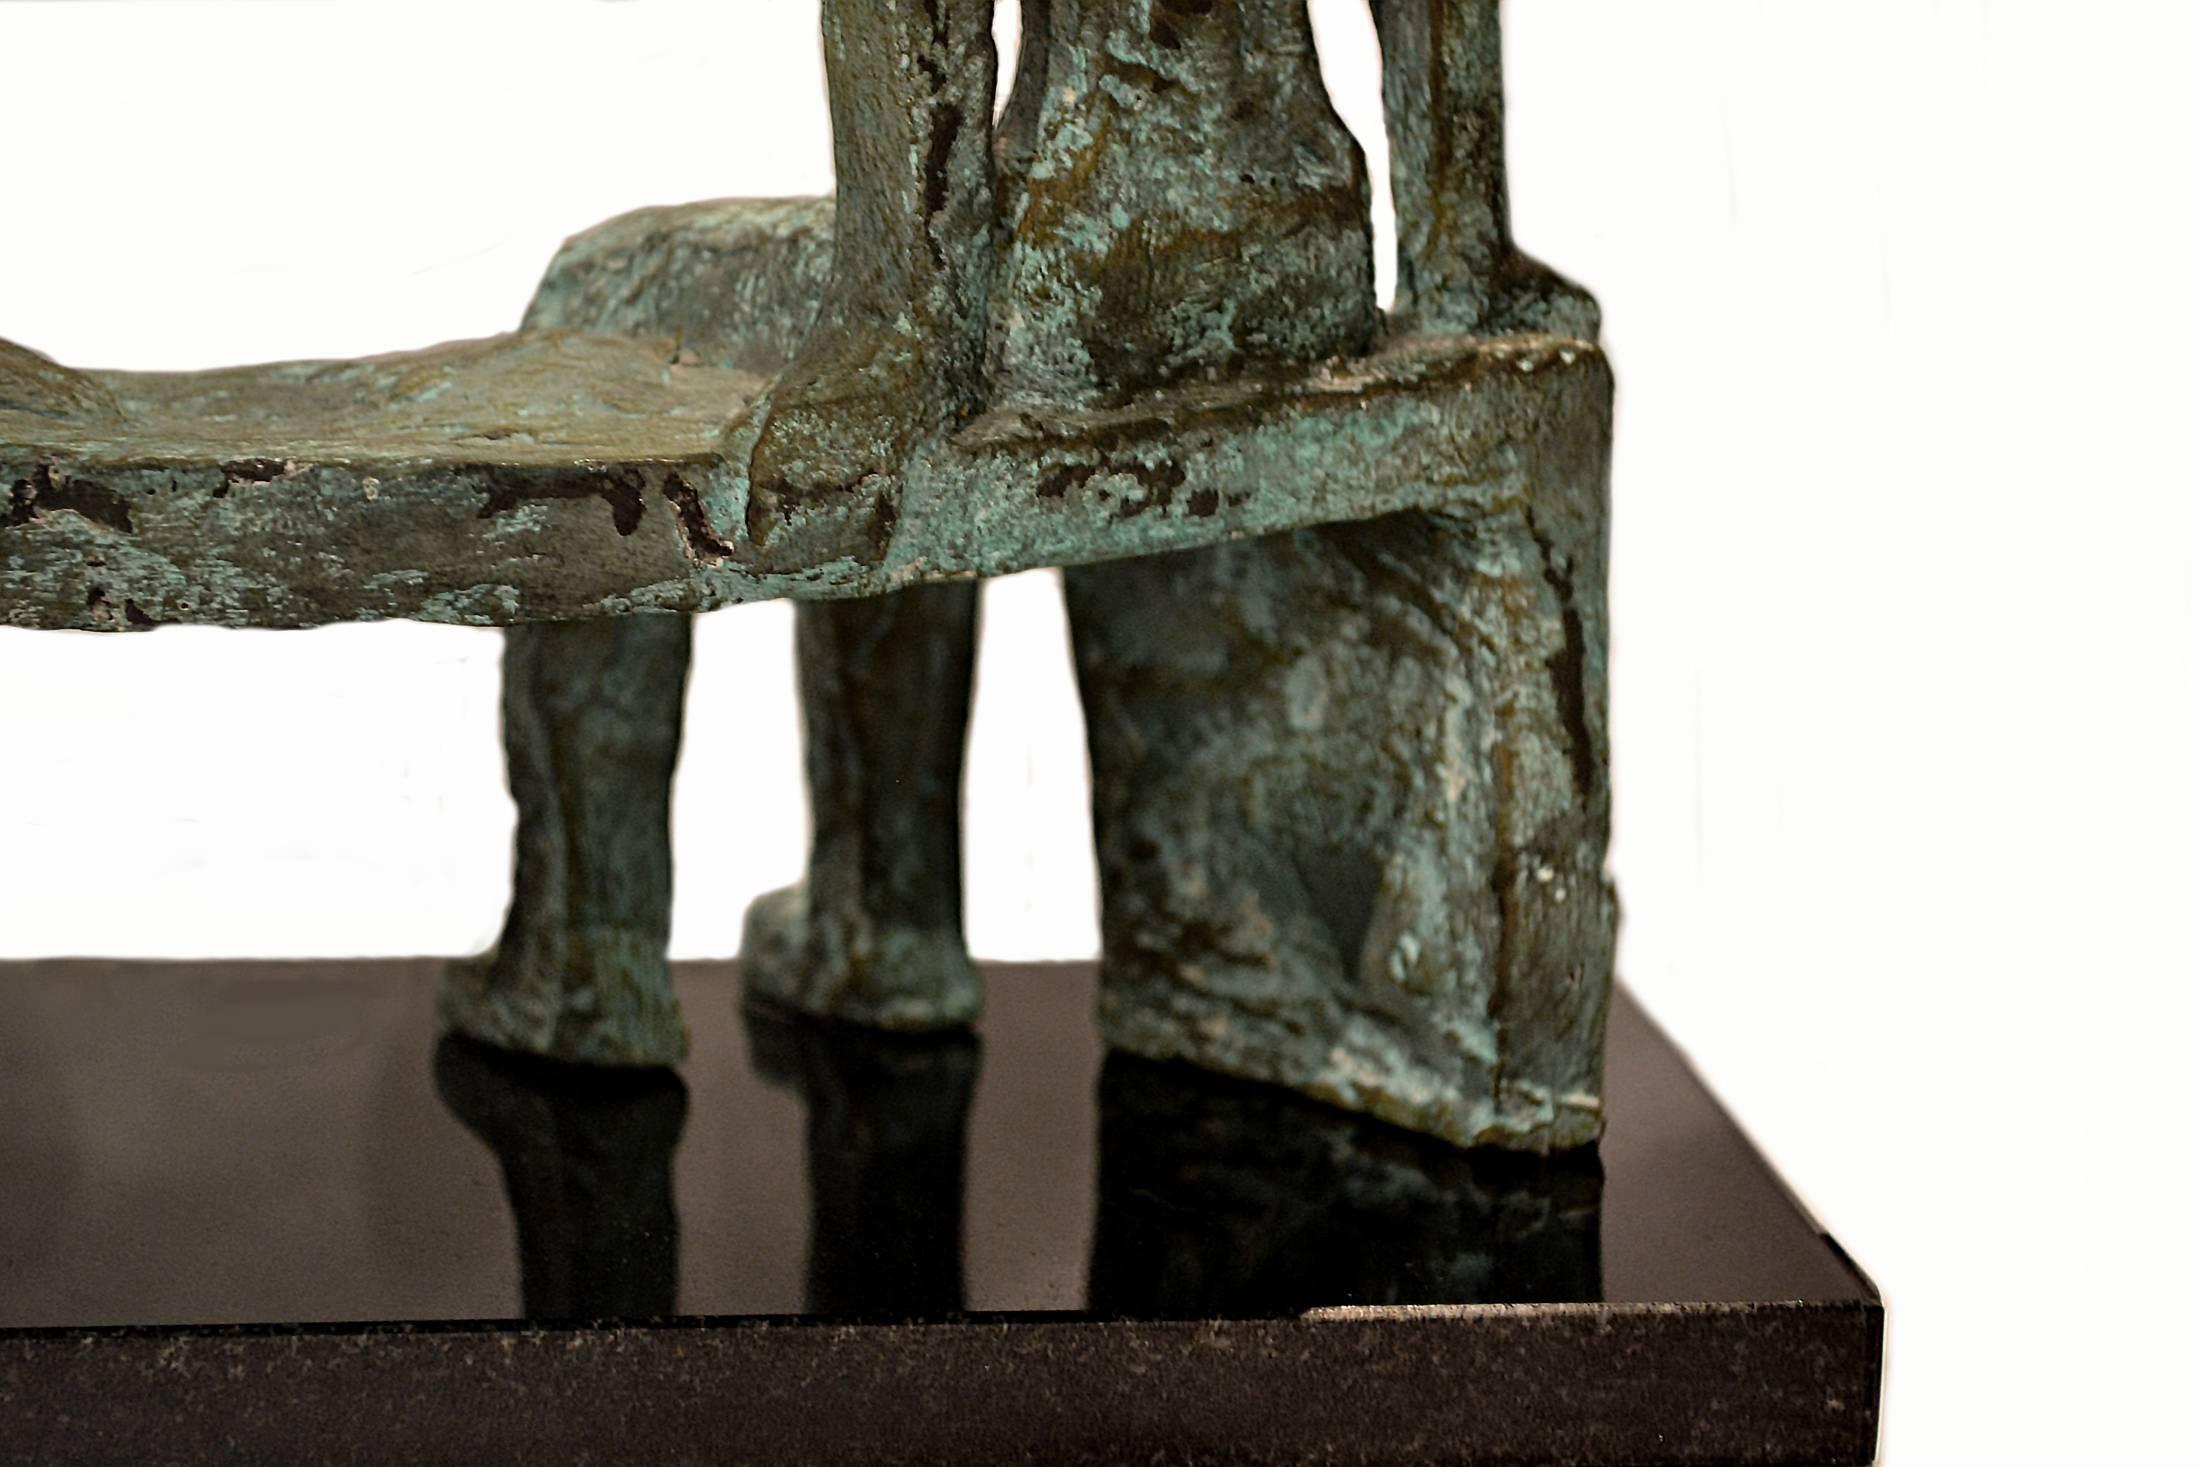 Hand-Carved After Henry Moore, a Vintage Bronze Sculpture of Two Figures Seated on a Bench